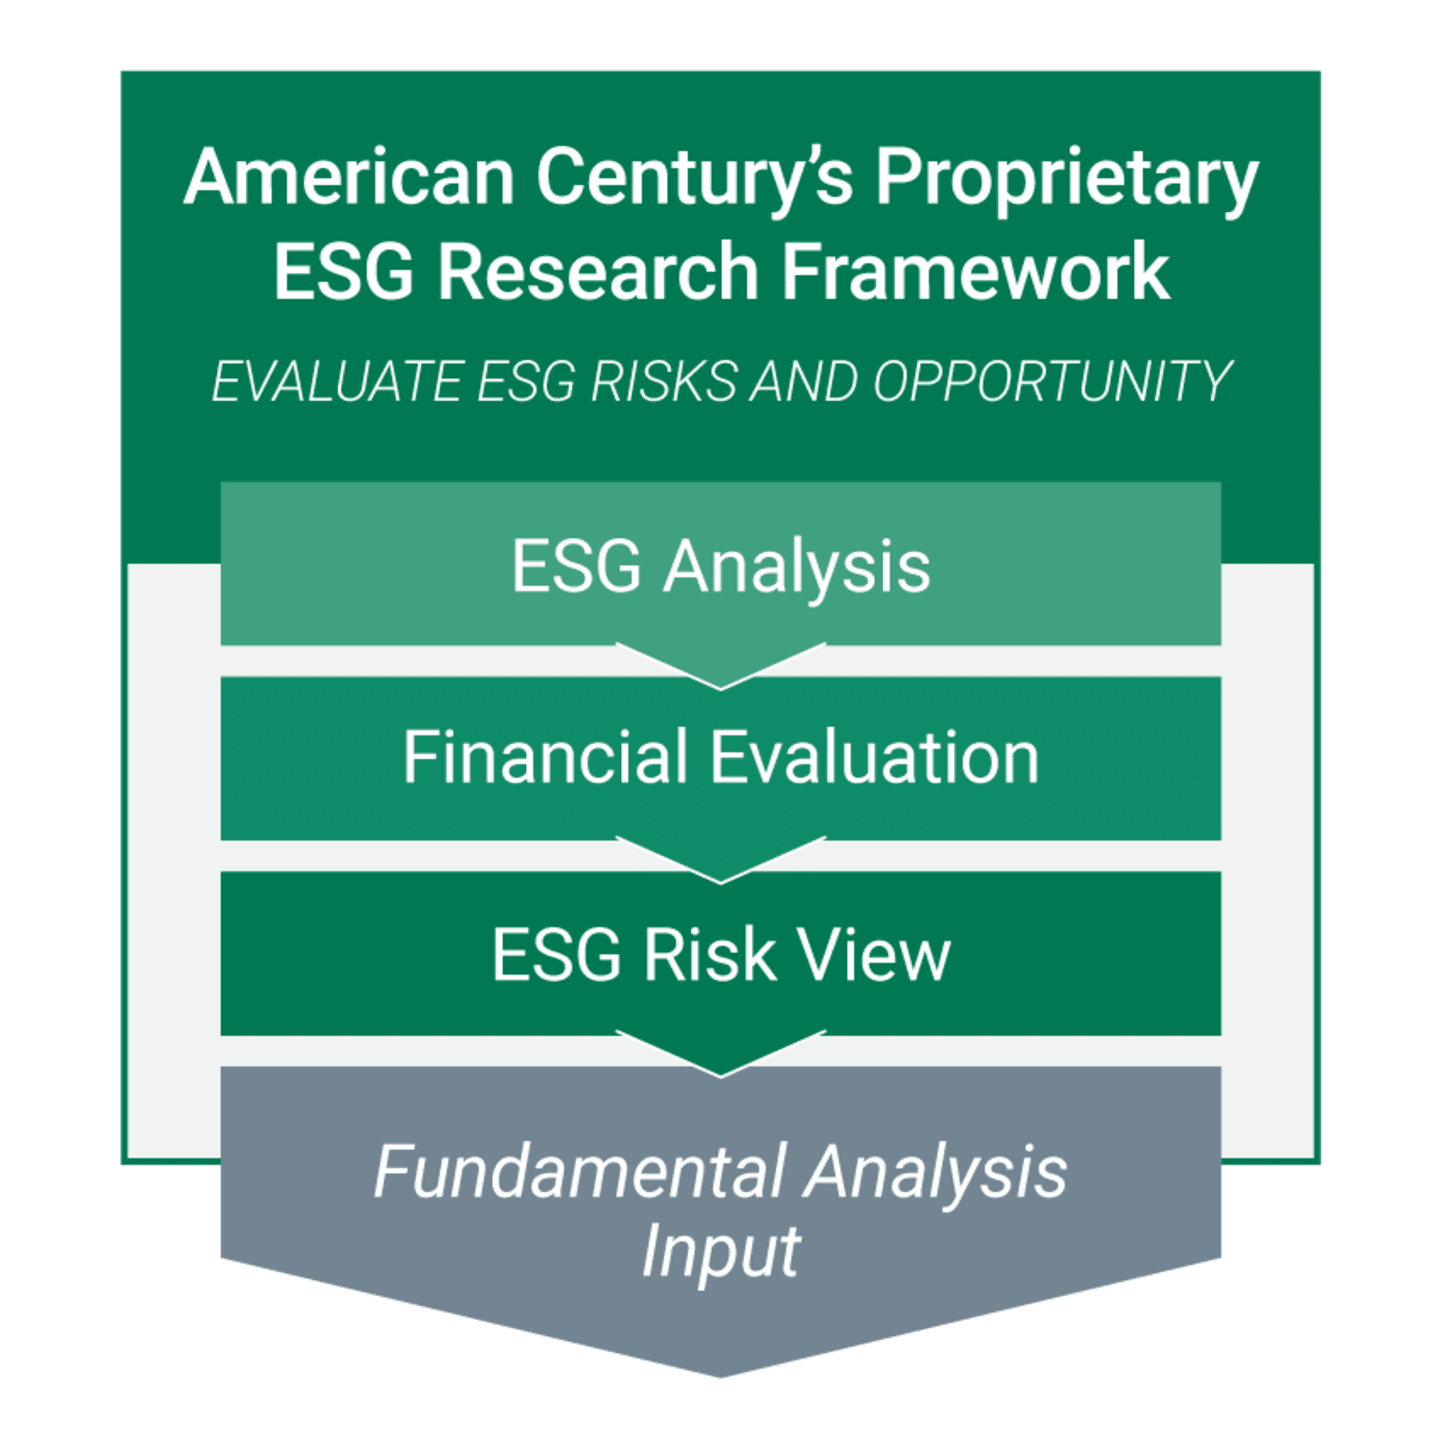 Fundamental Analysis is used to evaluate ESG risks and opportunity in a 3 step evaluation process called American Century's Proprietary ESG Research Framework.